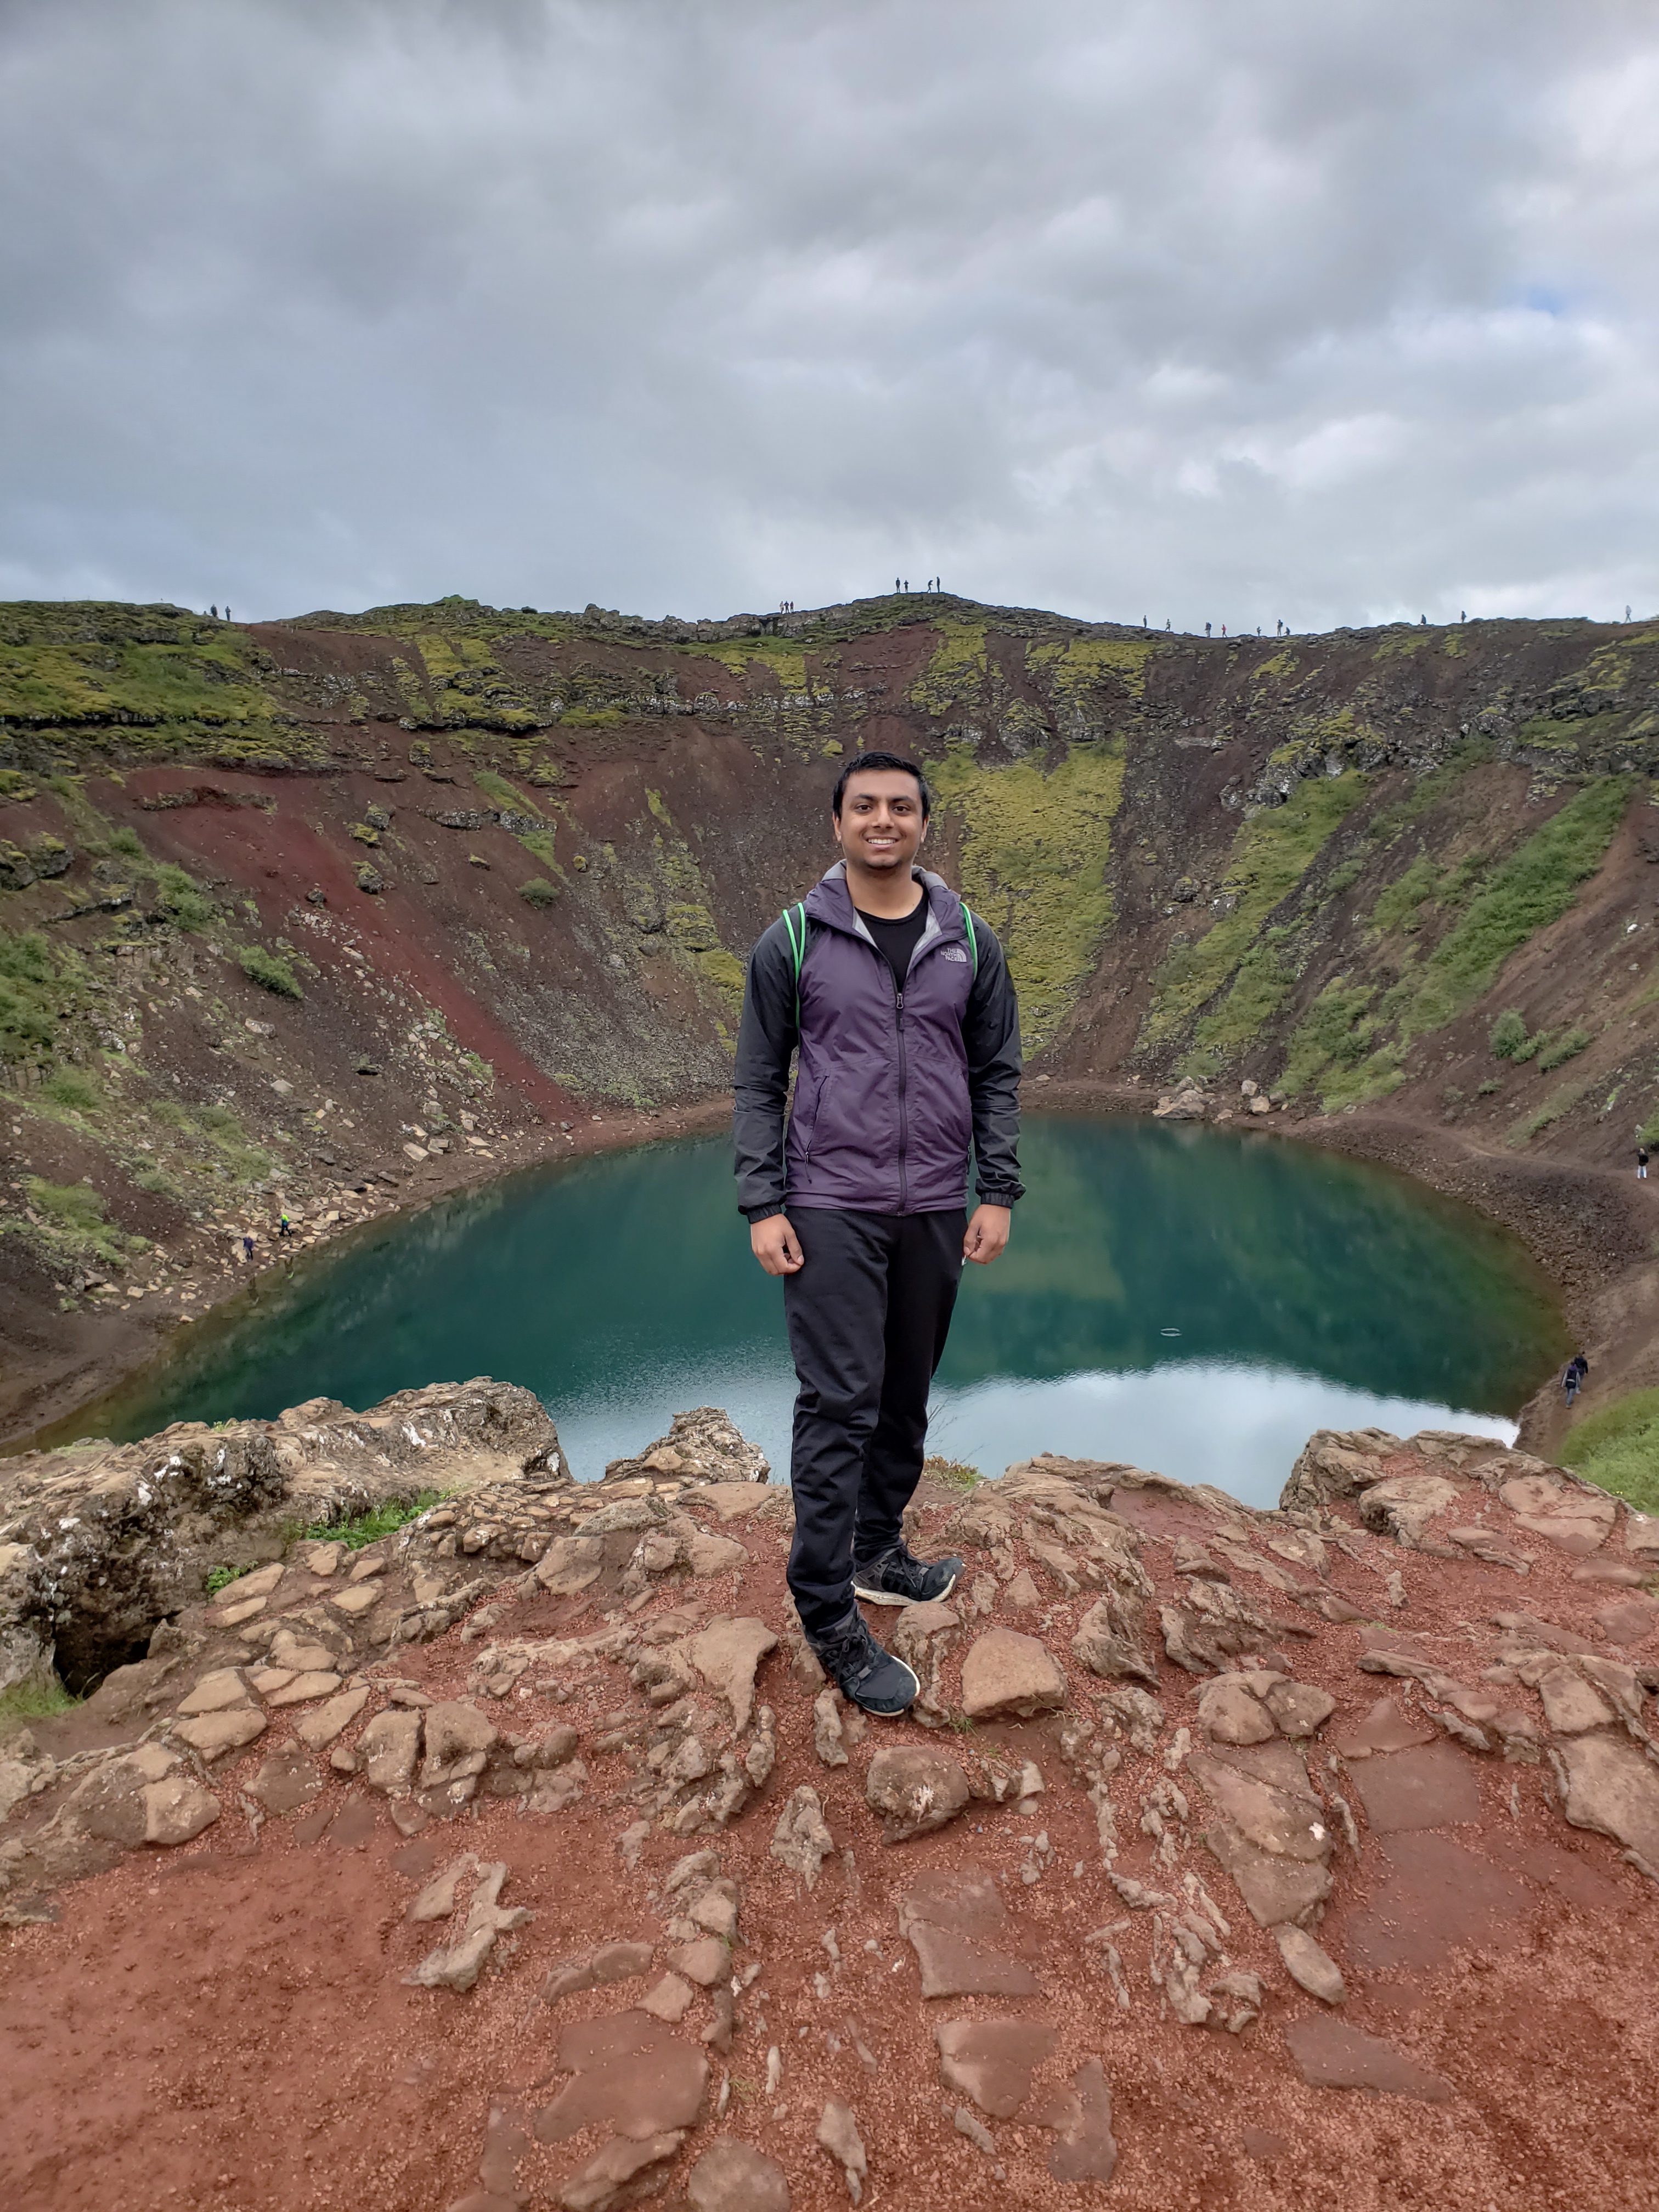 Virang Ketan Kumar has visited 15 countries, including Iceland where he walked in the Kerið volcanic crater lake.